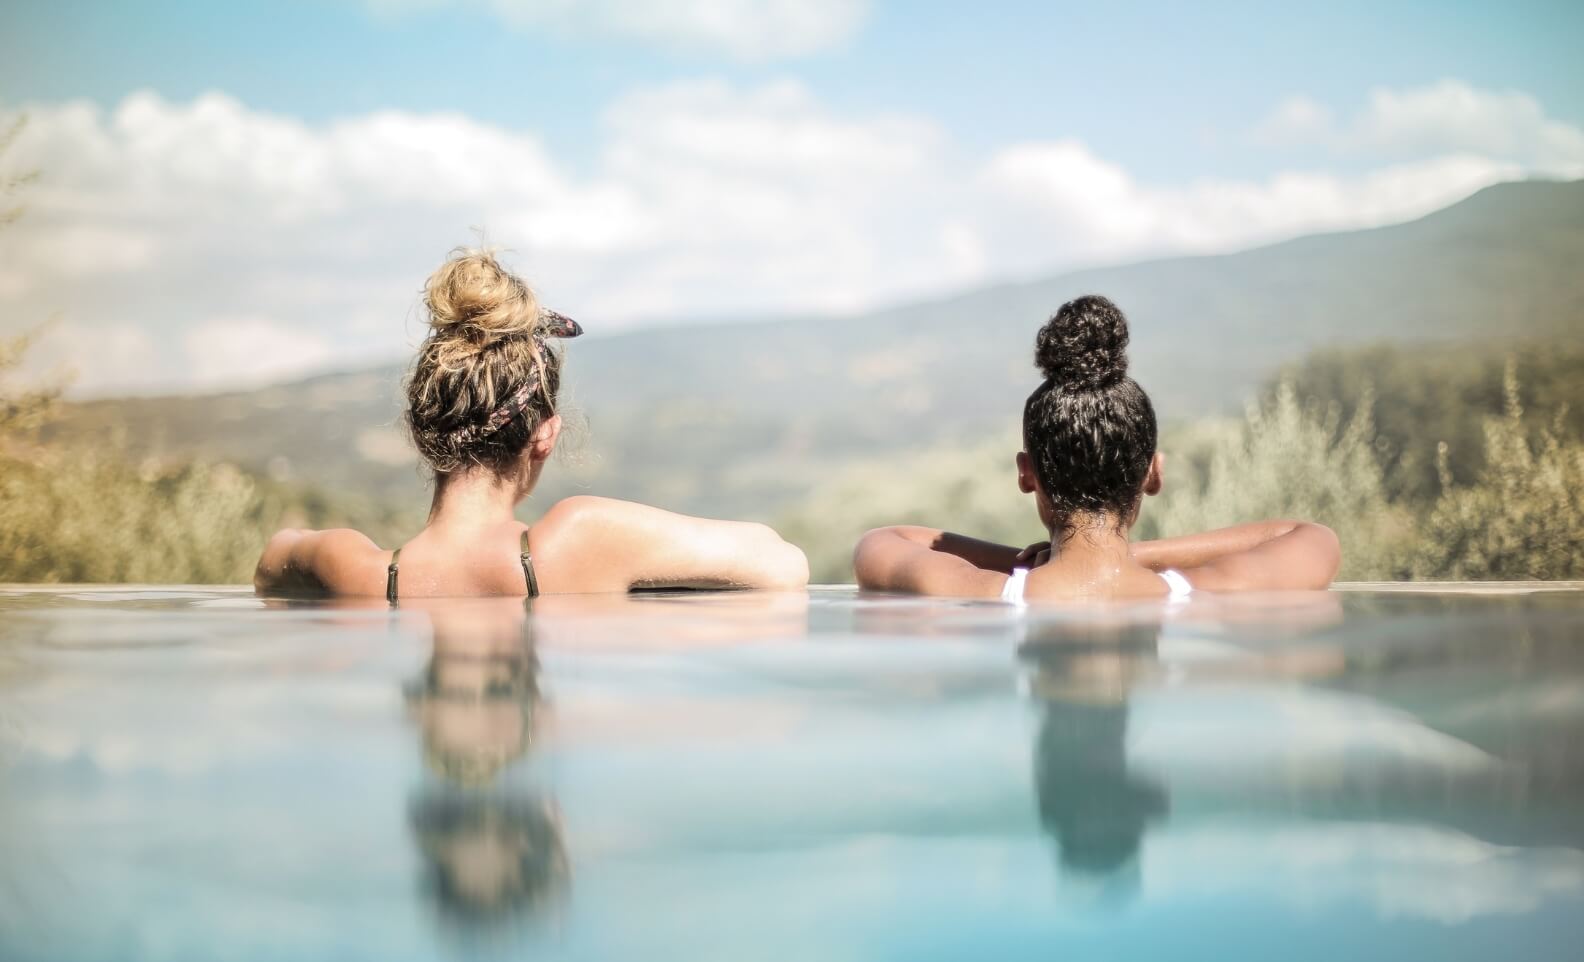 Two Selfless women enjoying a relaxing moment in a pool with a scenic landscape view in the background